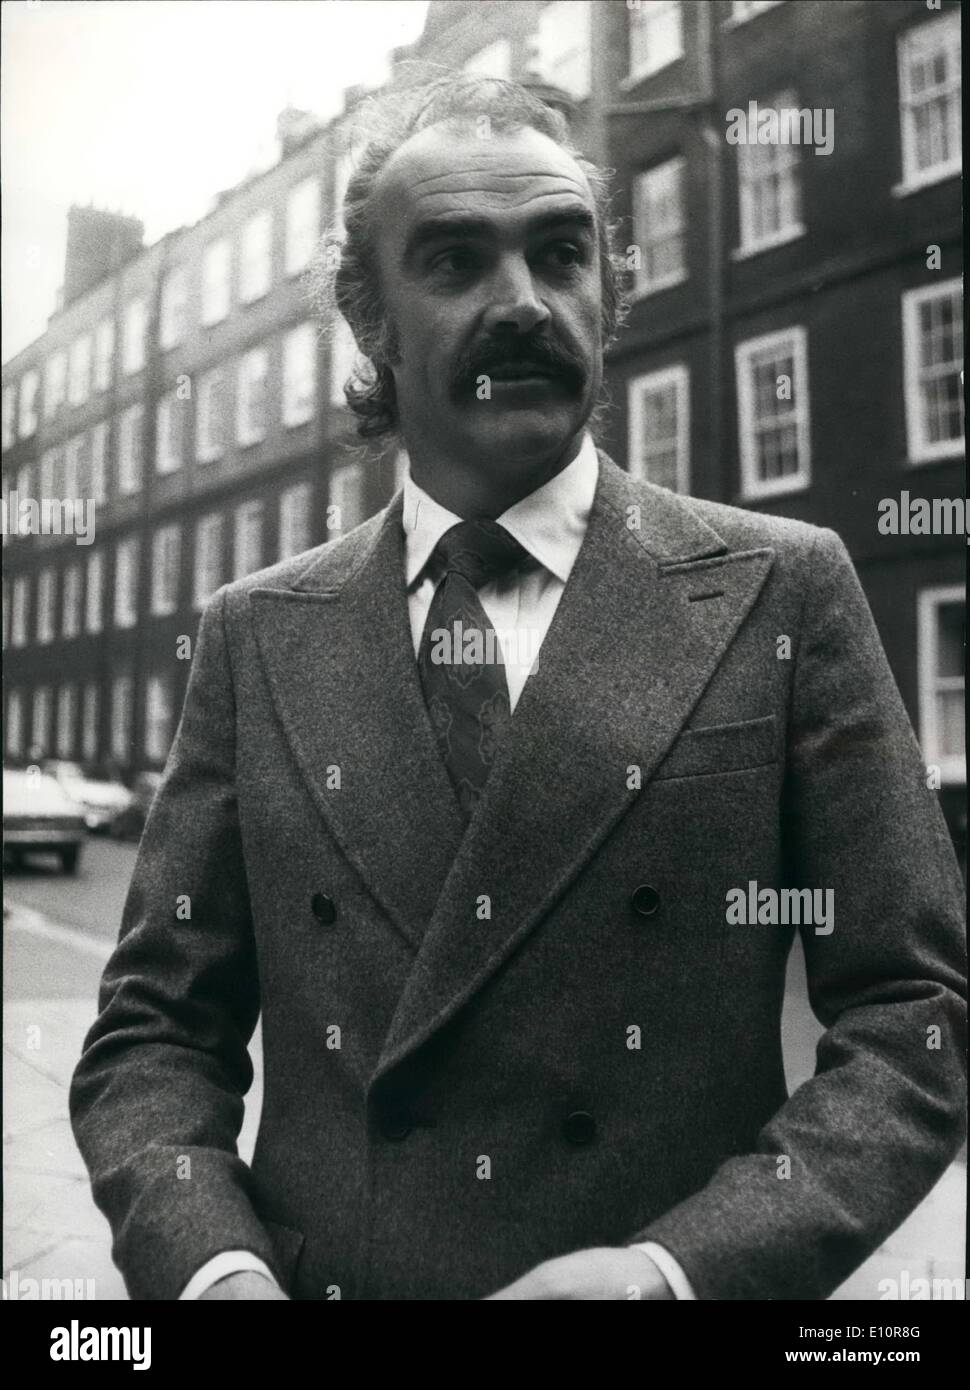 Oct. 10, 1973 - Sean Connery divorce petition at Law Courts: A petition by actor Sean Connery for a divorce decree against actress Diane Cilento was heard today at the Law Courts. Photo shows Sean Connery pictured in London today. Stock Photo